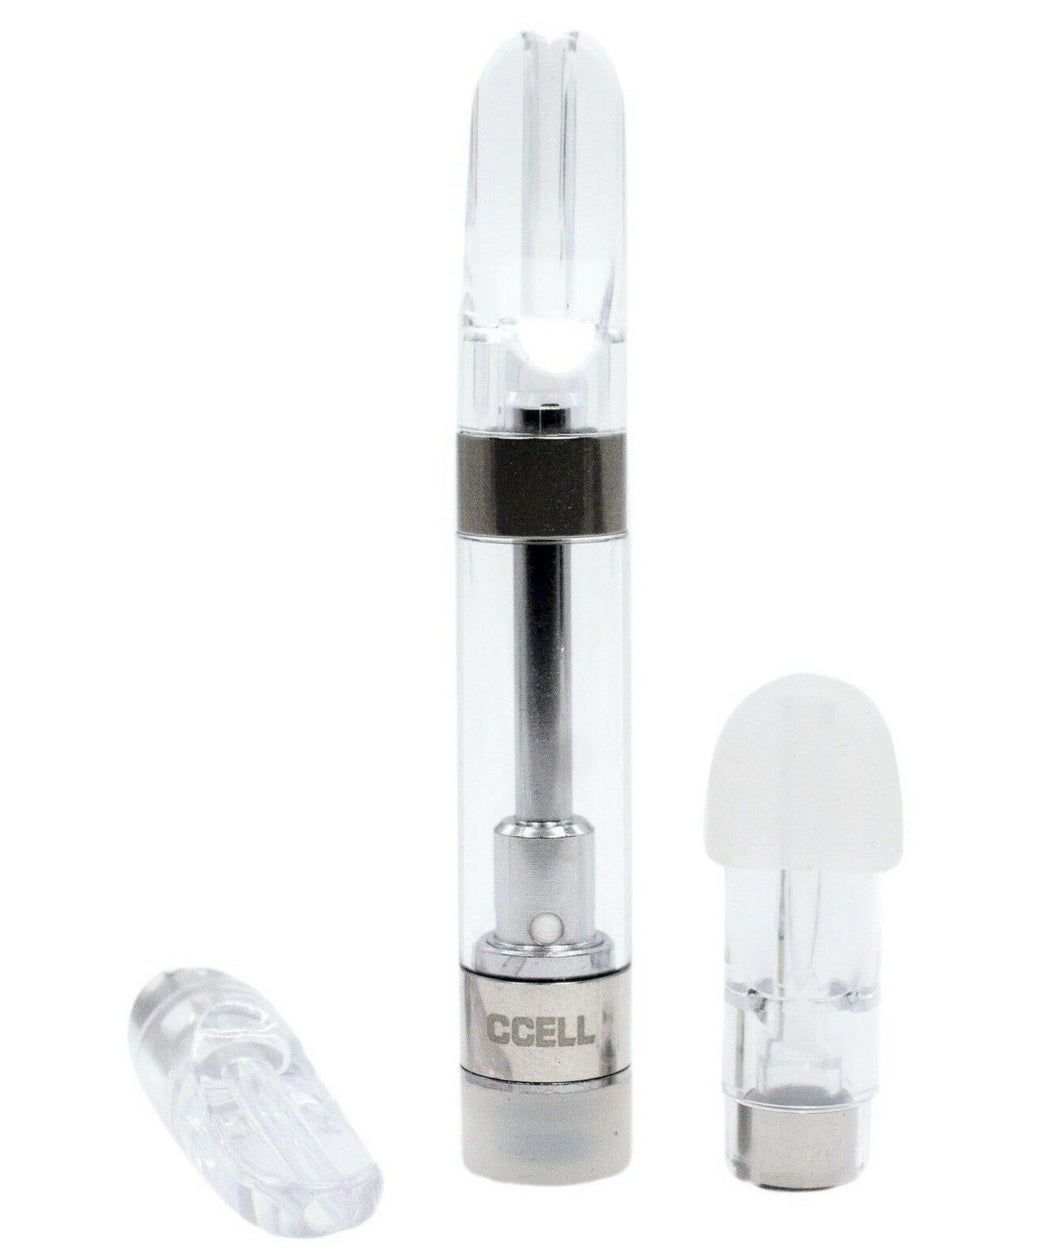 CCELL 5 Pack Genuine M6T10 510 Cartridge Polycarbonate Co2 Oil Ship24hr/less USA